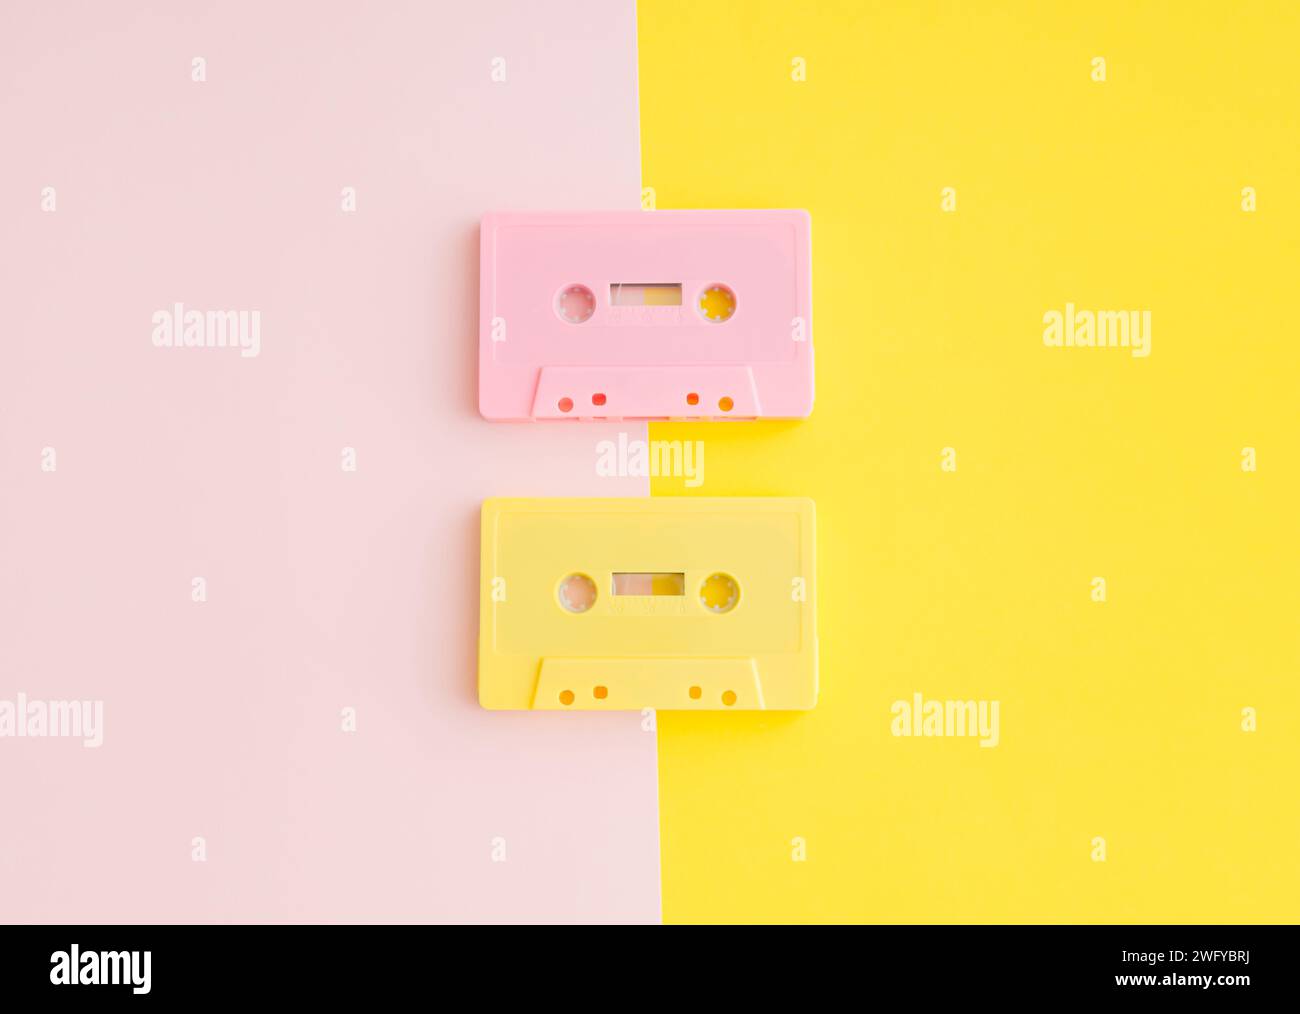 Layout of retro pink and yellow audio cassette tapes on pastel  pink and yellow background. Creative concept of retro technology. 80's aesthetic. Stock Photo